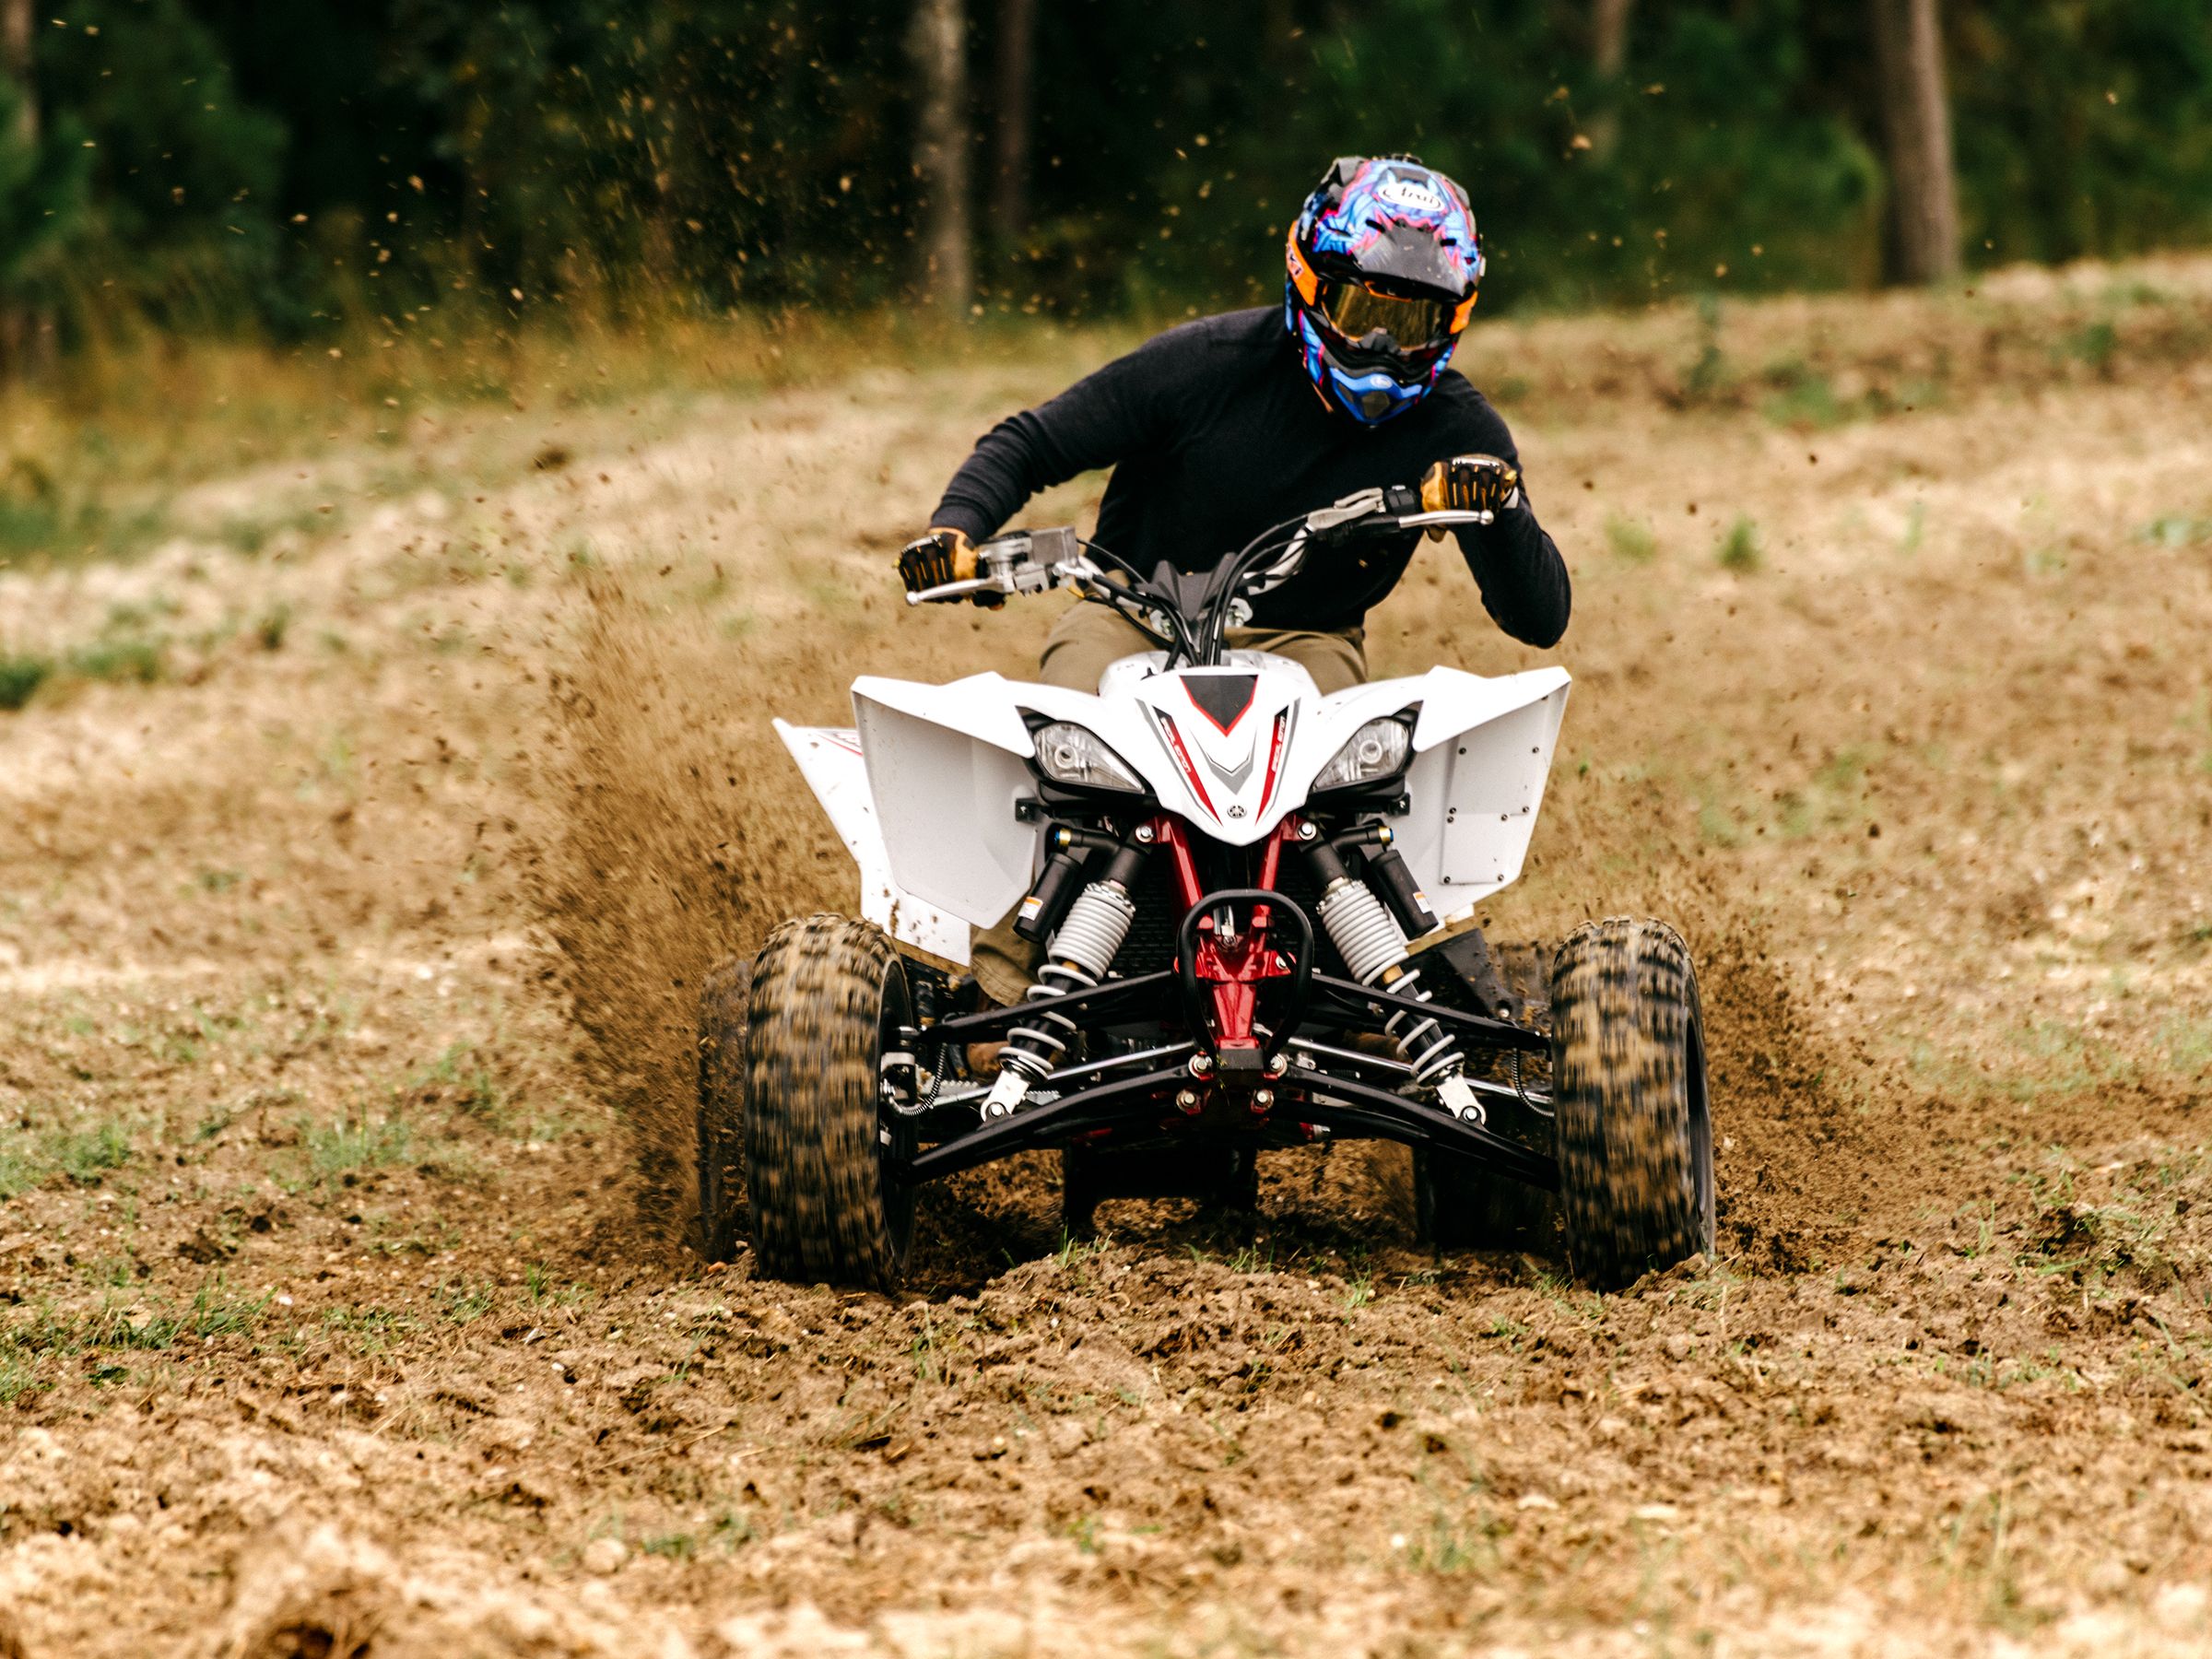 Sport ATV throwing mud on track, an adrenaline-fueled ride for off-road enthusiasts